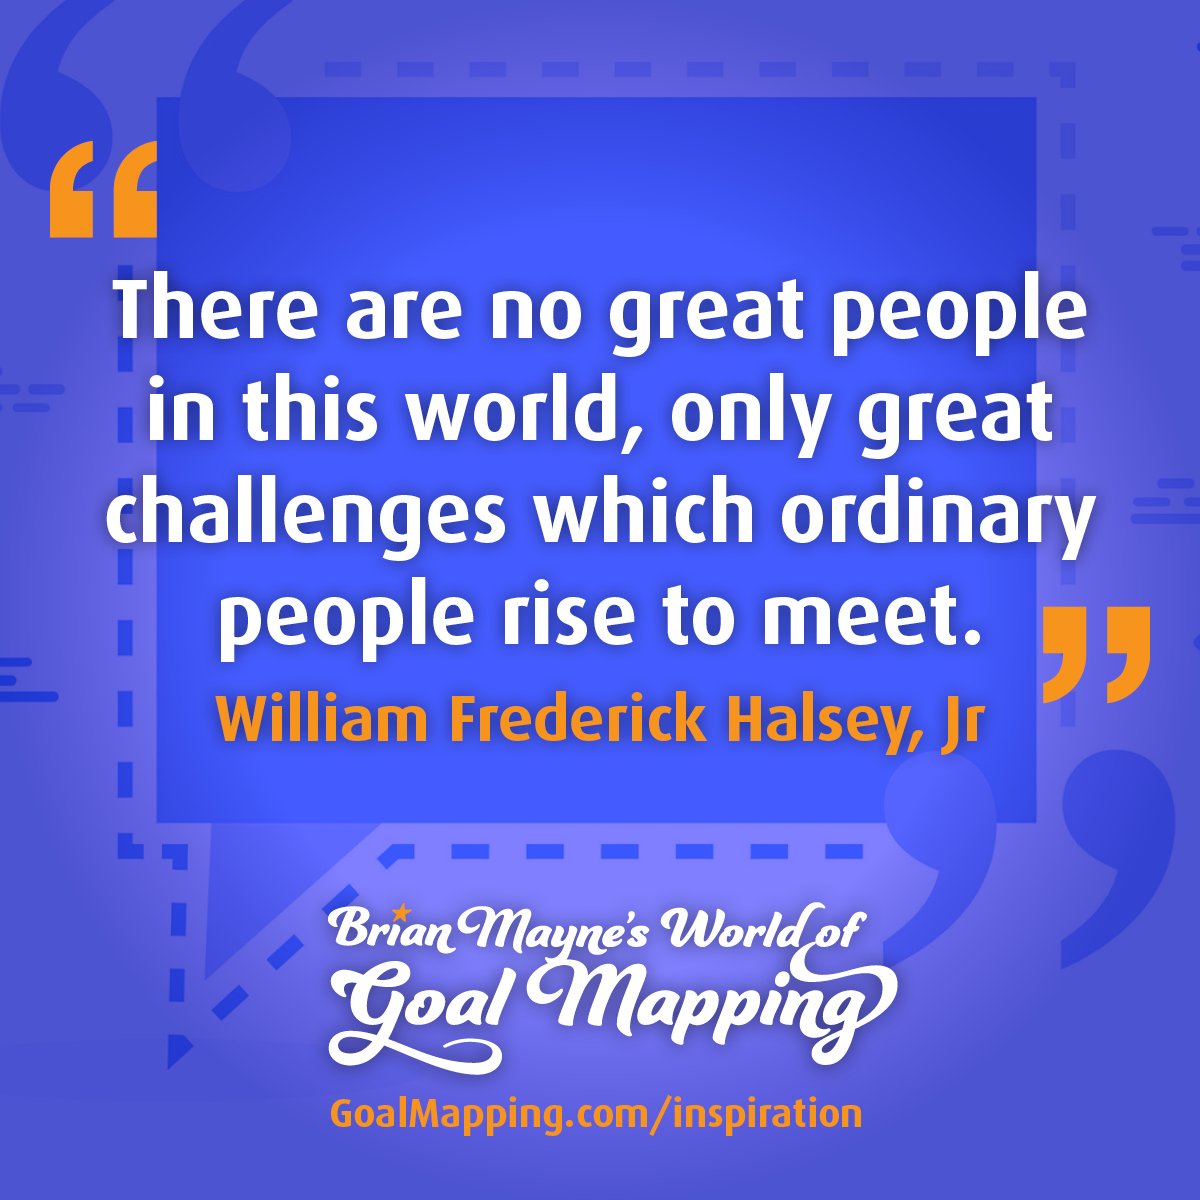 "There are no great people in this world, only great challenges which ordinary people rise to meet." William Frederick Halsey, Jr